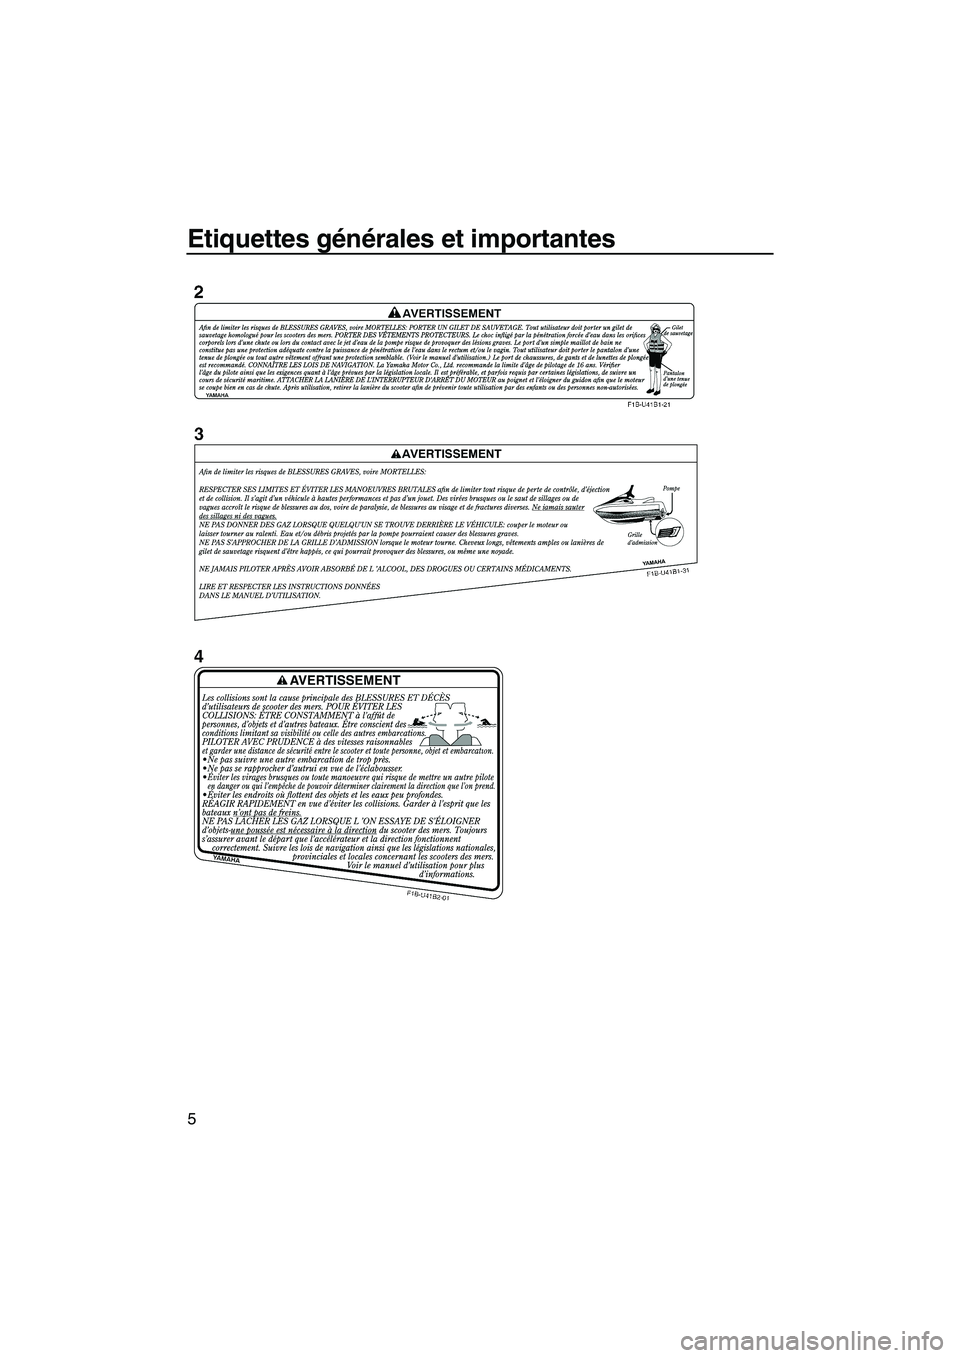 YAMAHA FX HO CRUISER 2009  Notices Demploi (in French) Etiquettes générales et importantes
5
UF2H70F0.book  Page 5  Friday, January 16, 2009  9:38 AM 